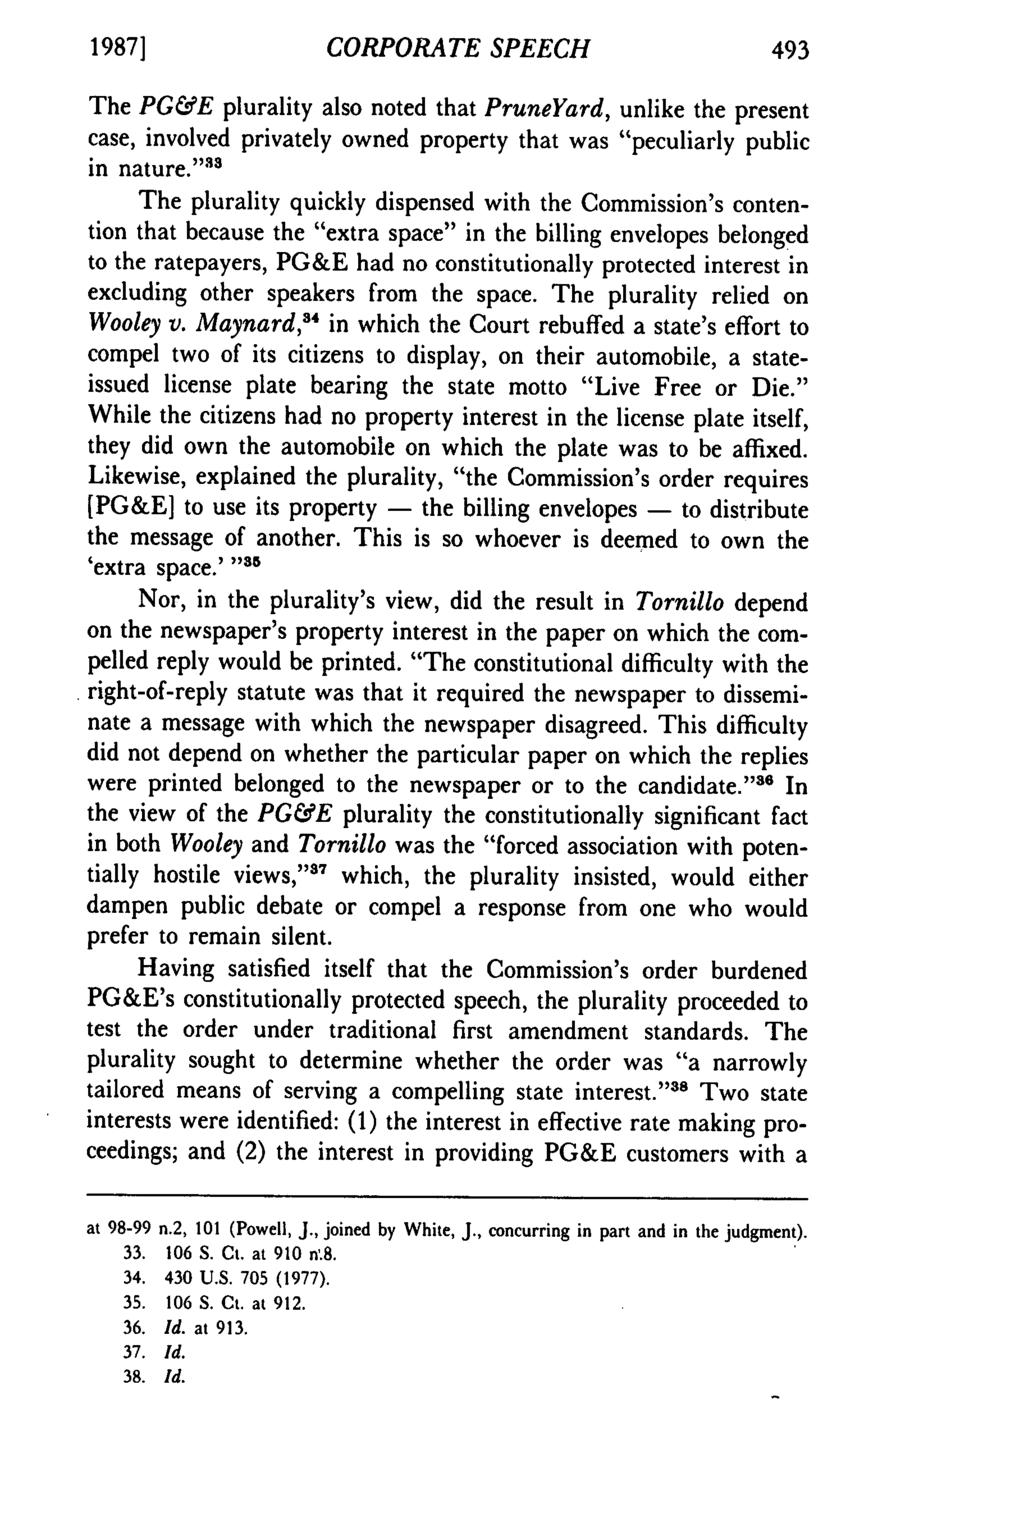 1987] CORPORATE SPEECH The PG&E plurality also noted that PruneYard, unlike the present case, involved privately owned property that was "peculiarly public in nature.